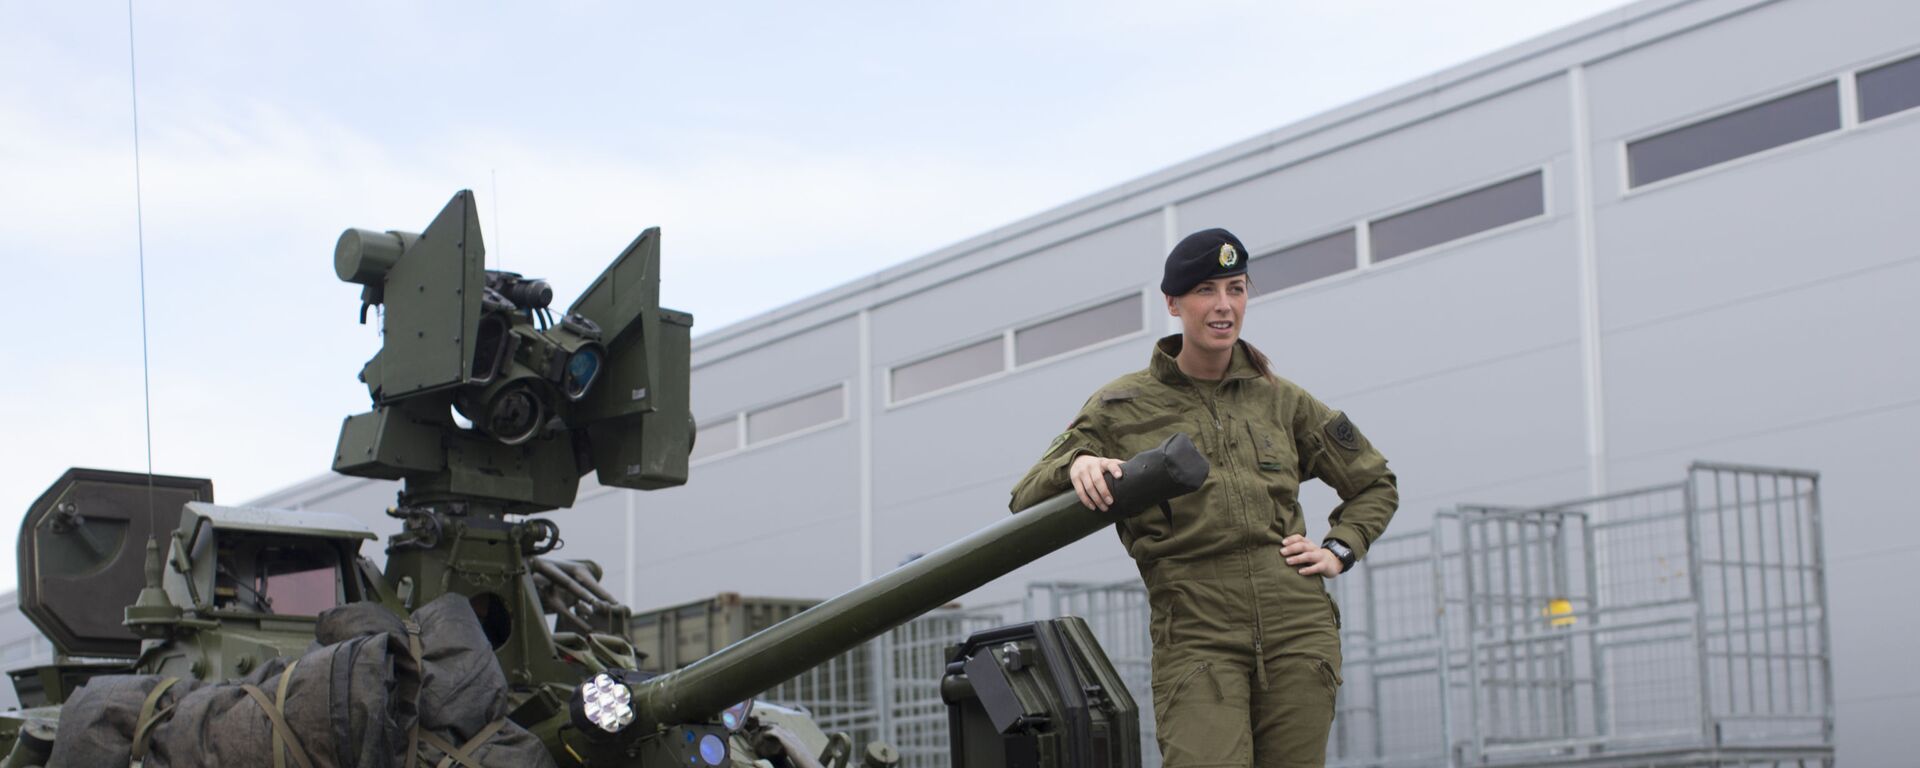 Female soldiers talk next to a CV90 combat vehicle at the armored battalion in Setermoen, northern Norway on August 11, 2016. Norway has become the first NATO member to have compulsory conscription for women as well as men in the army. Recently, the first batch of army recruits joined the ranks in The Armored Battalion in the Norwegian Army located in Setermoen in northern Norway.  - Sputnik International, 1920, 29.08.2022